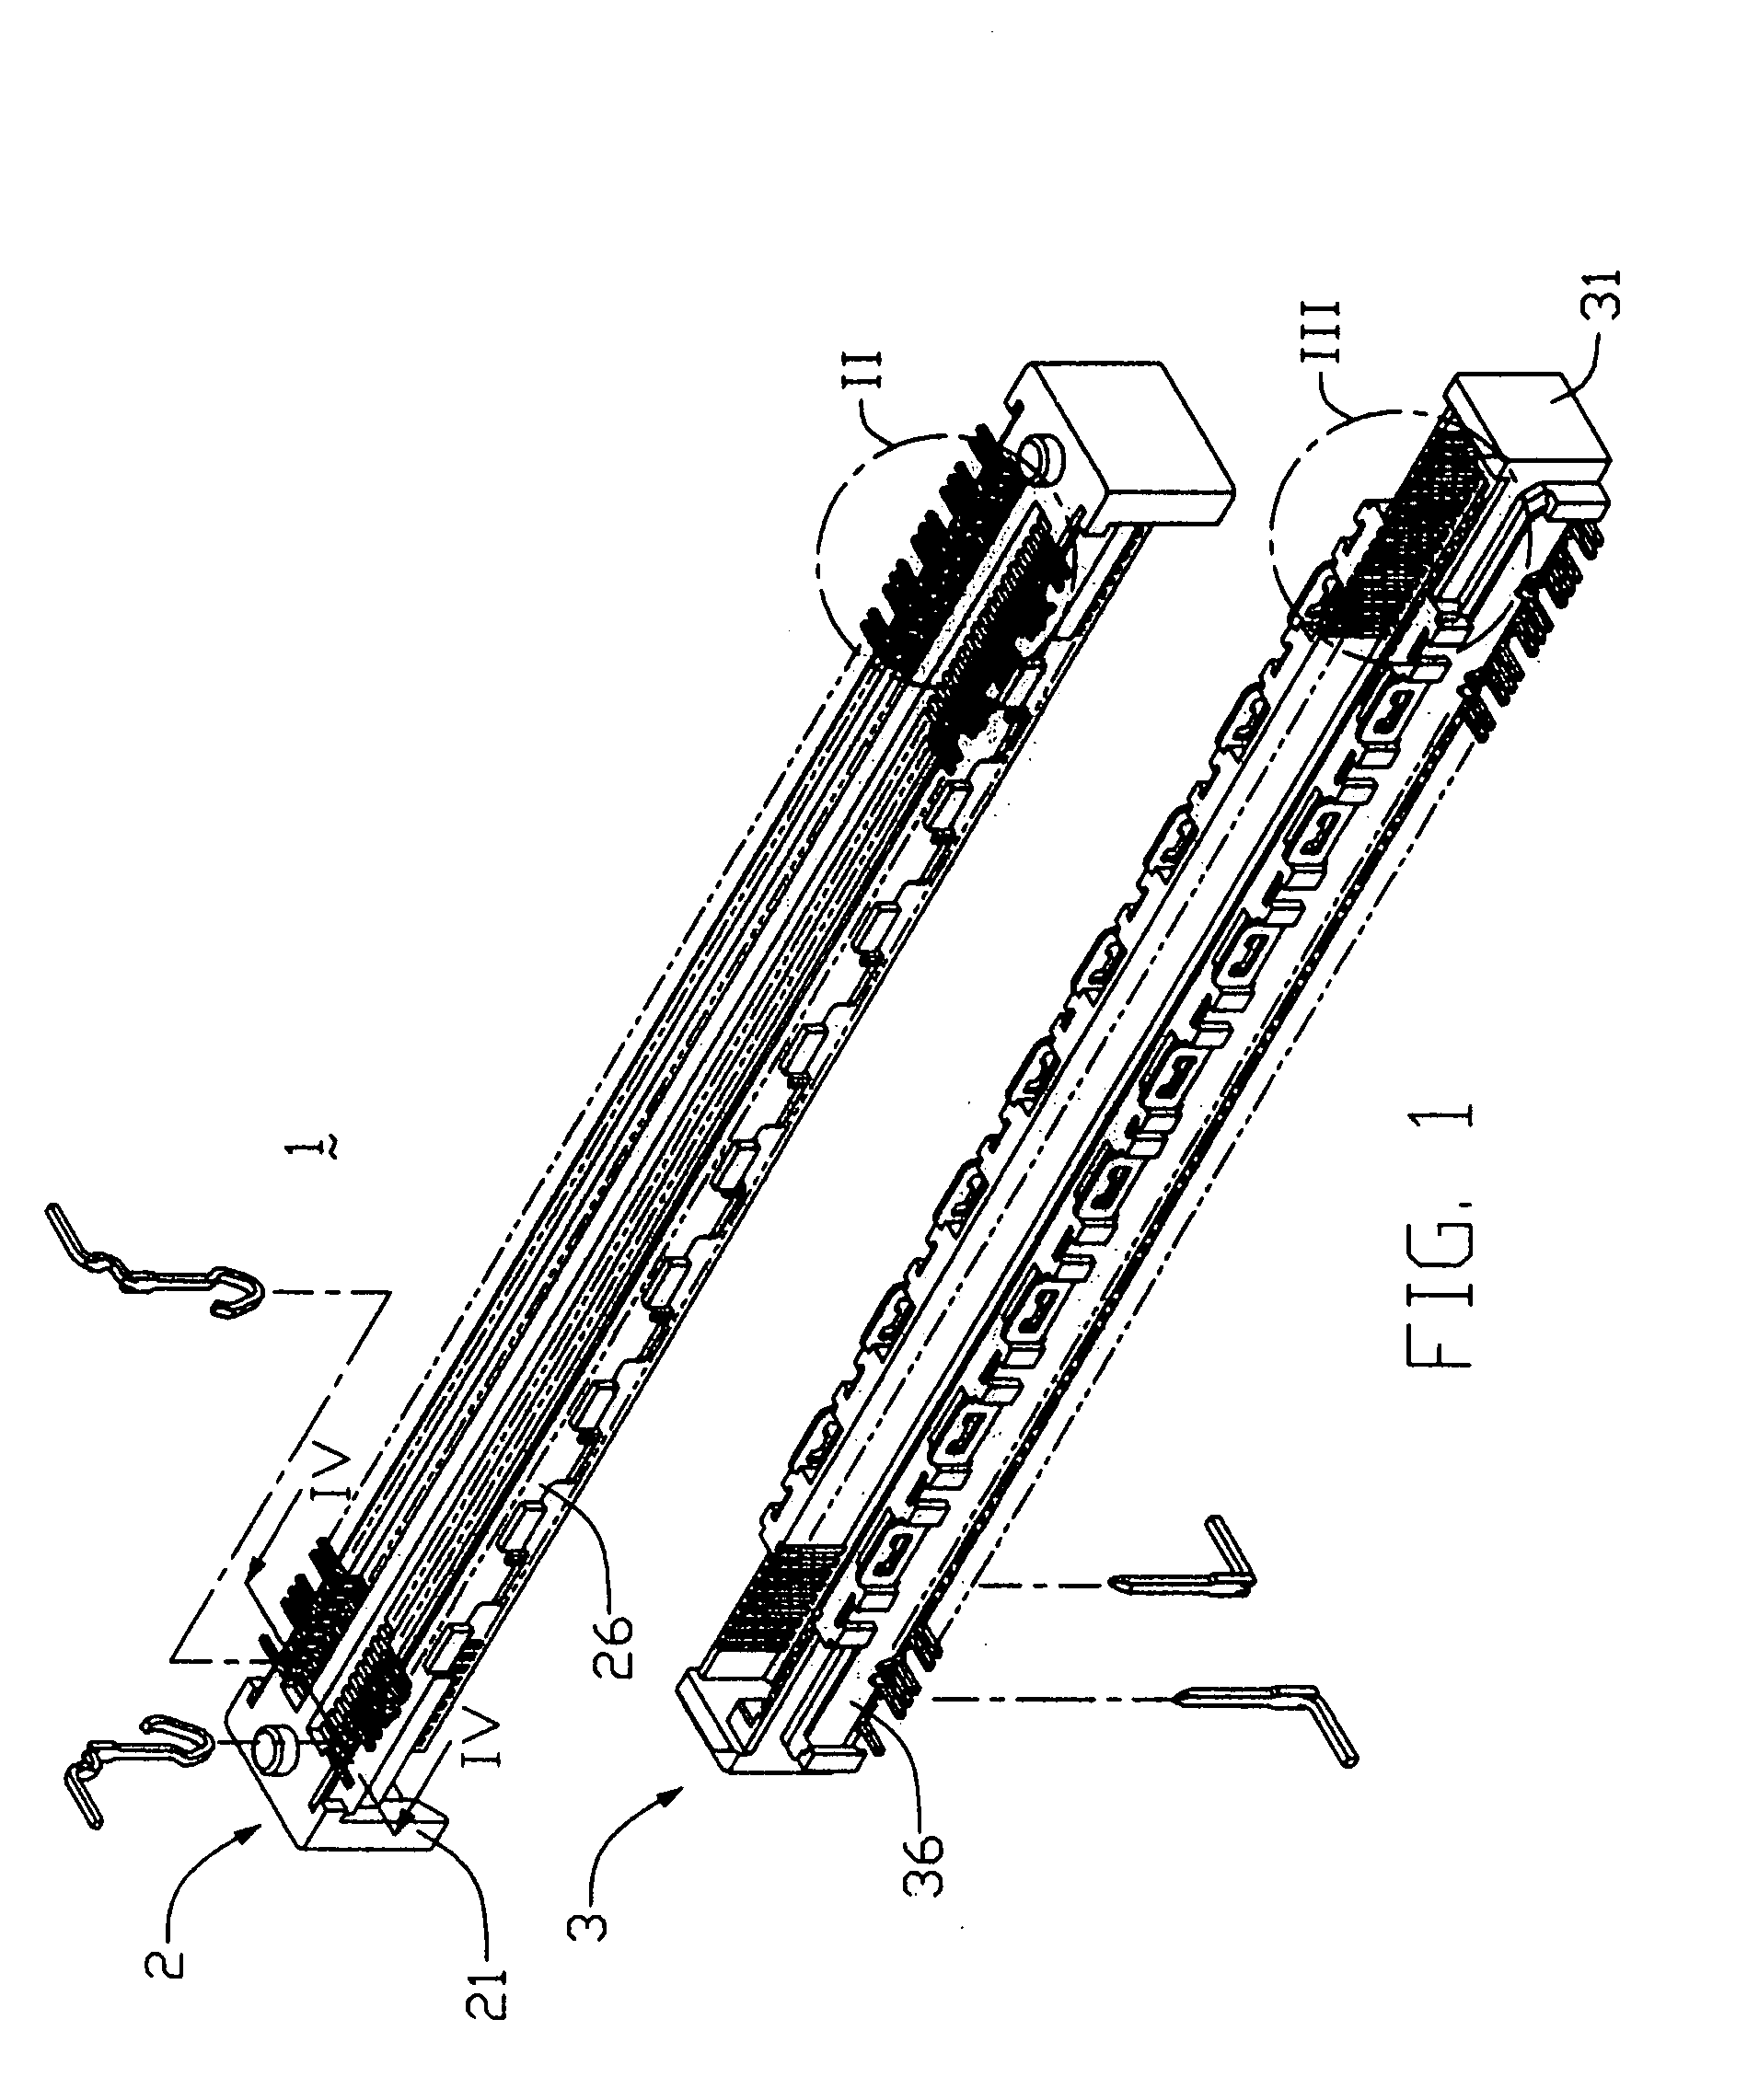 Electrical connector assembly having contacts configured for high-speed signal transmission